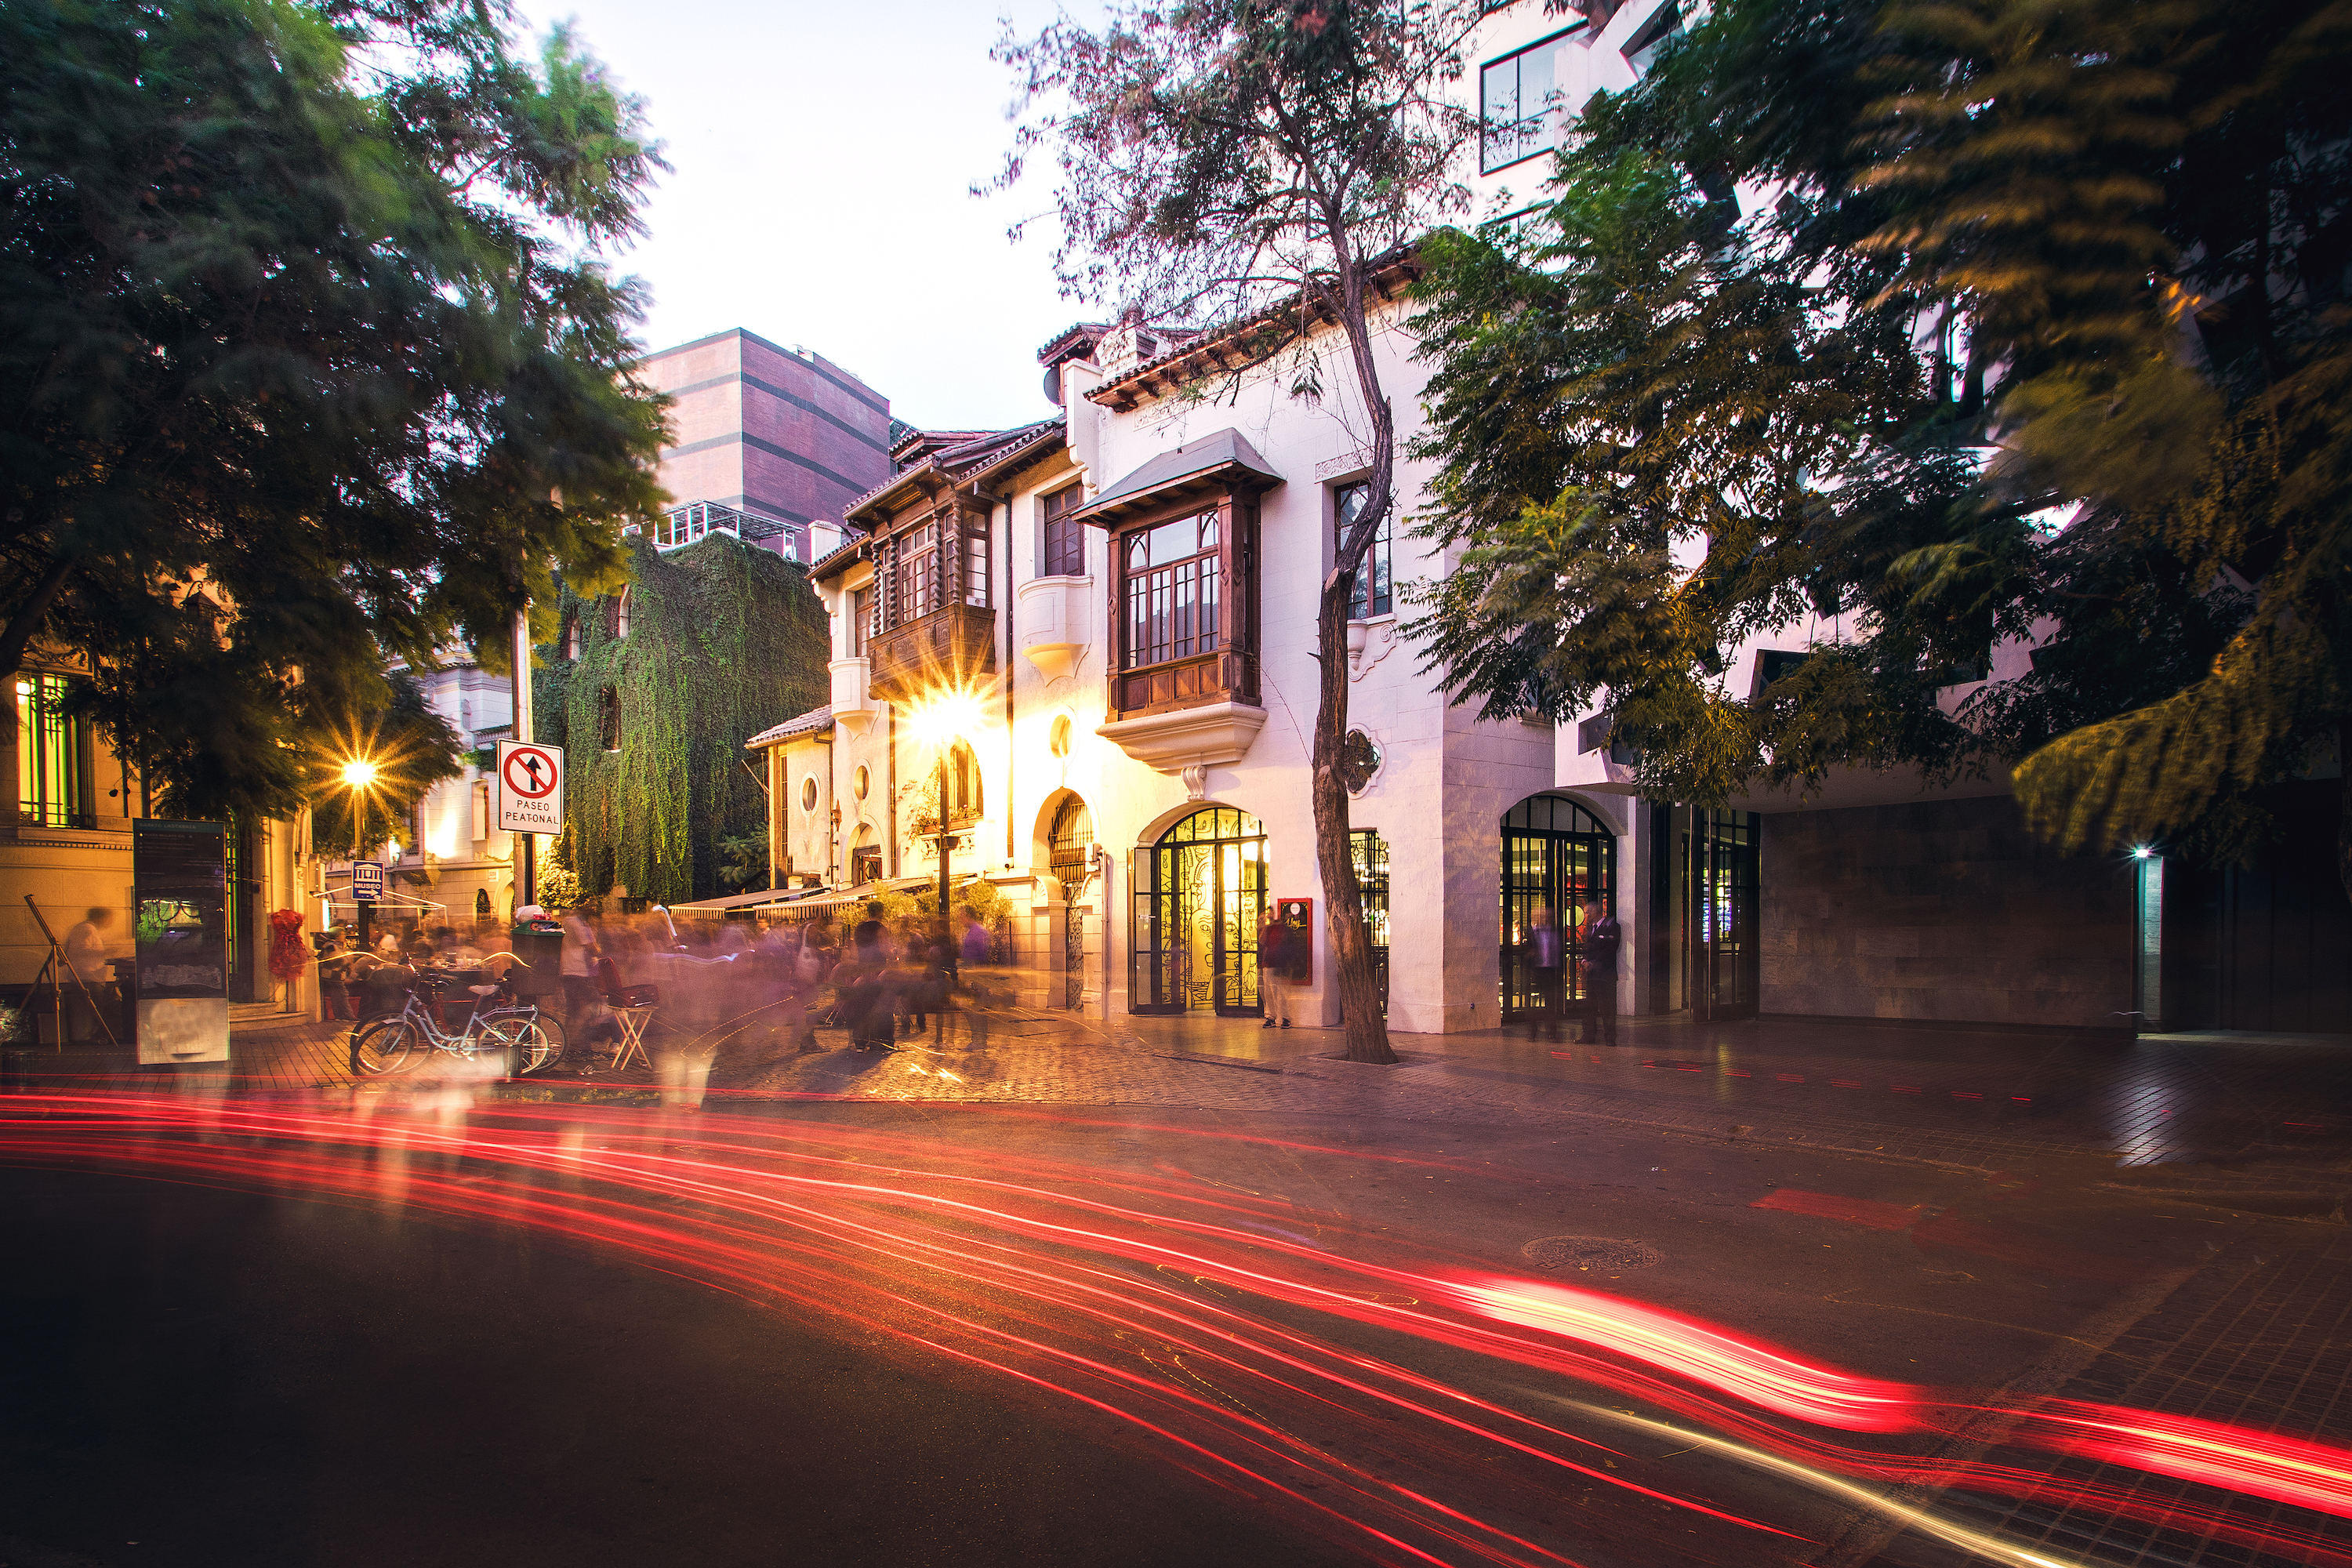 A charming street in the Lastarria neighborhood of Santiago, Chile